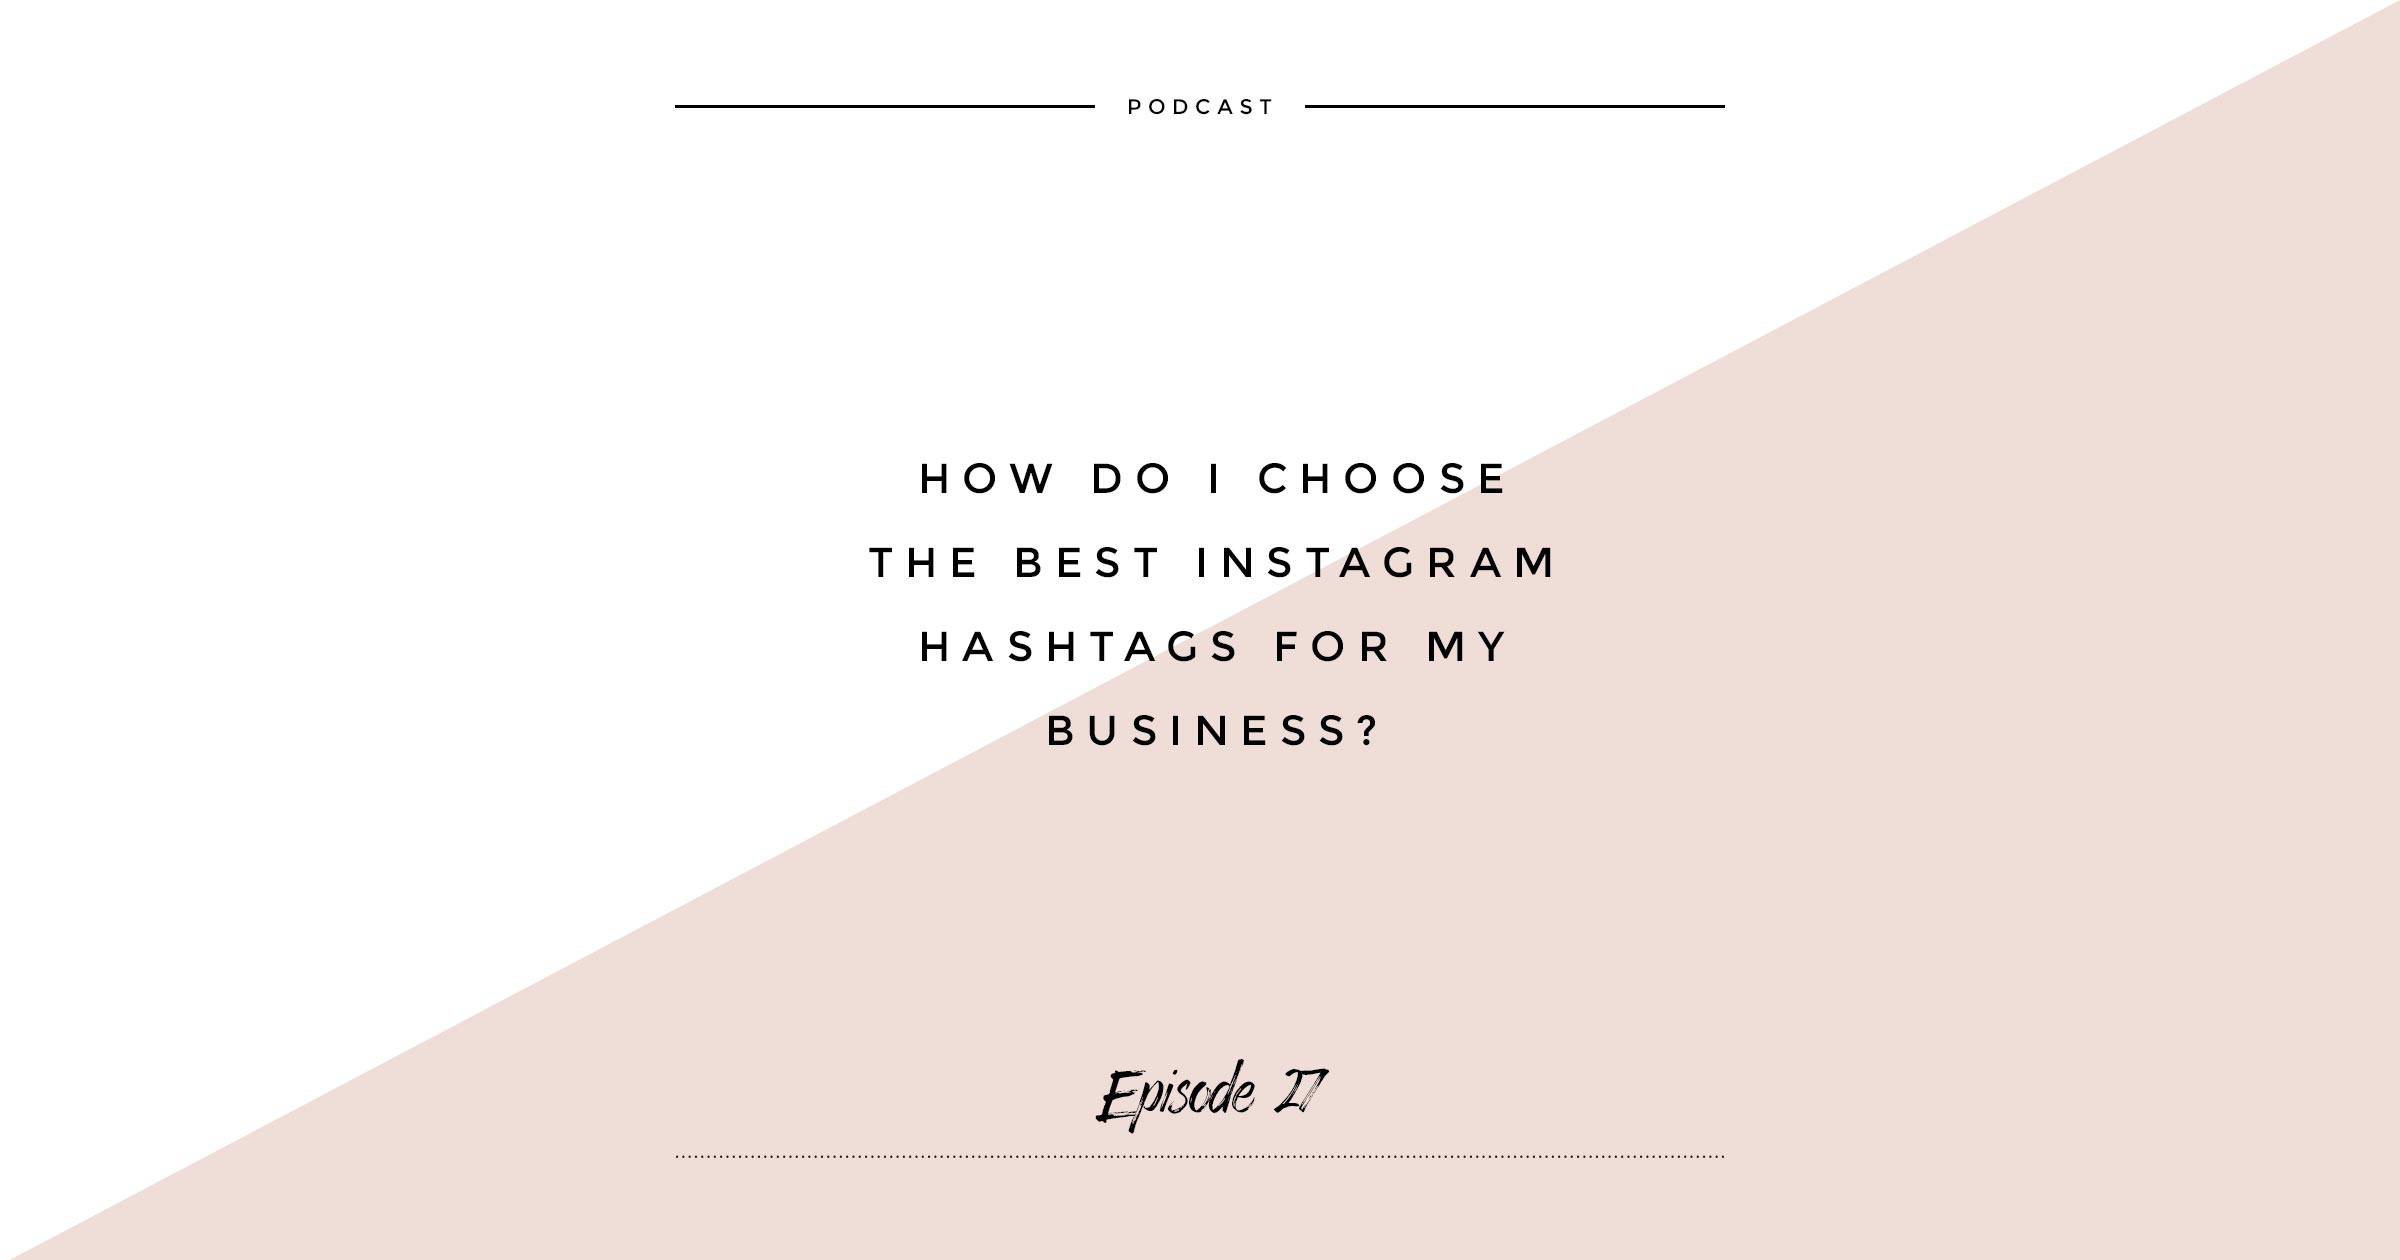 How to choose the best Instagram hashtags for your business